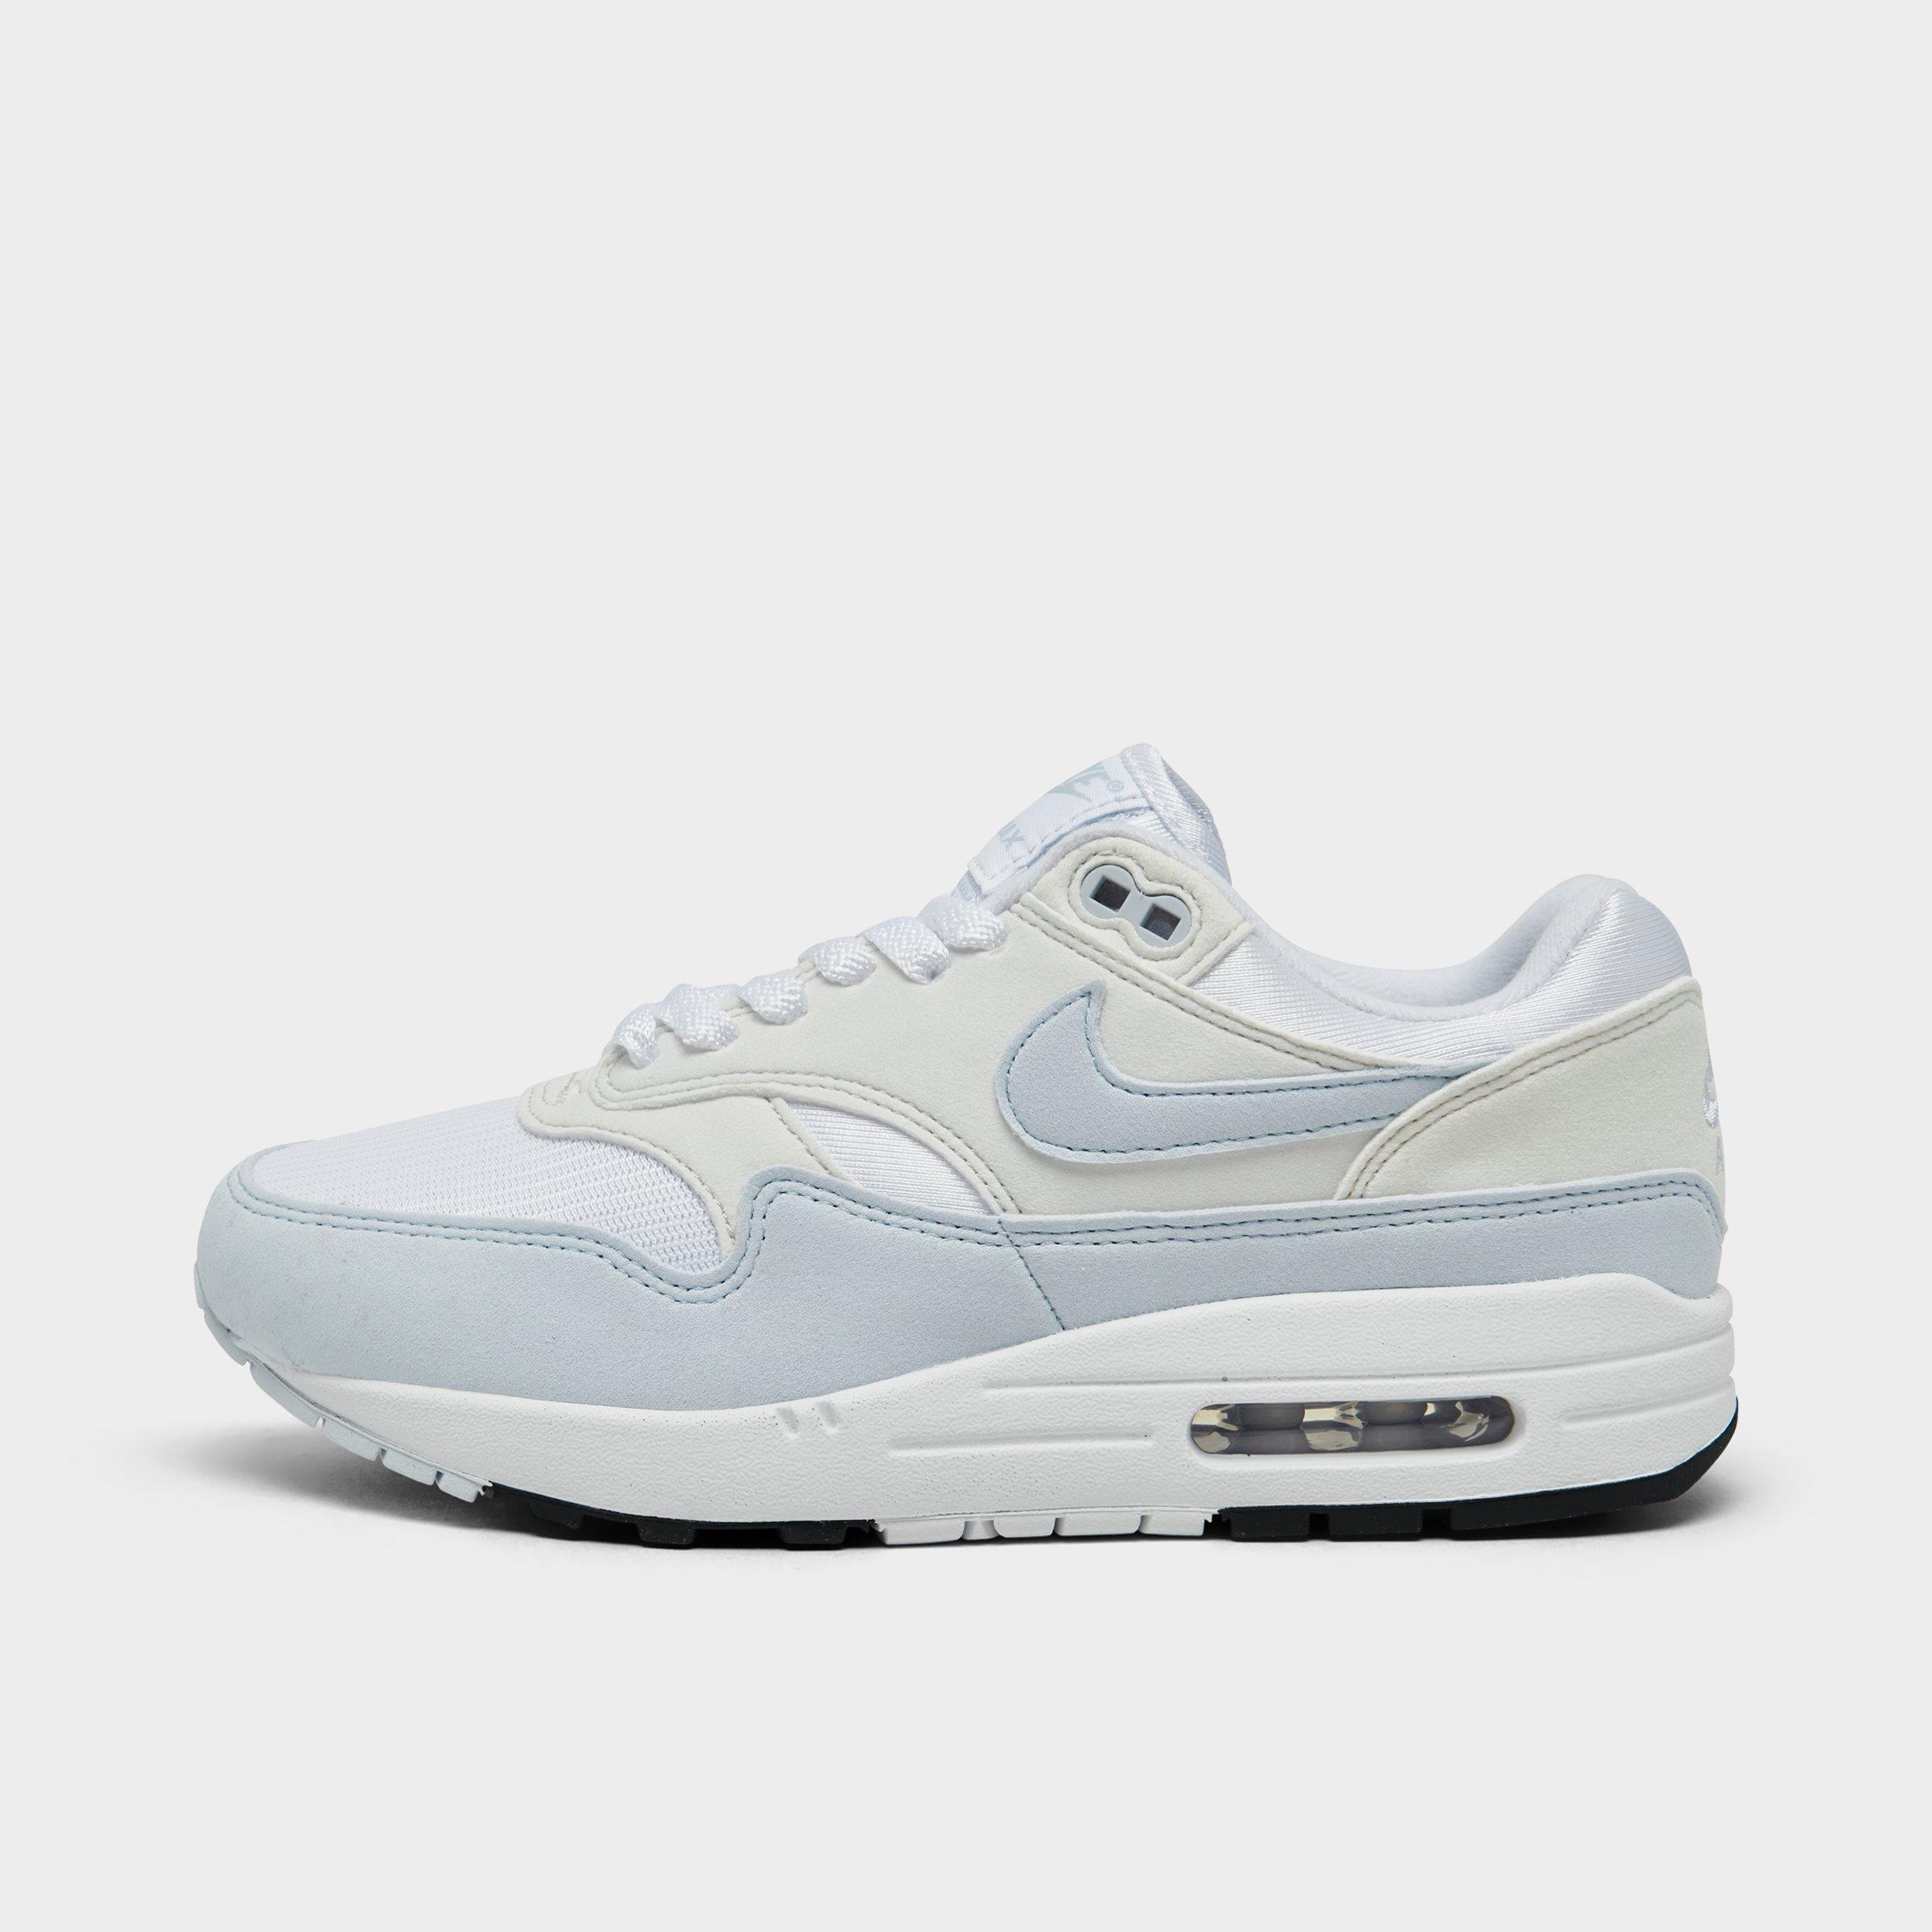 Shop Nike Women's Air Max 1 Casual Shoes In White/football Grey/platinum Tint/black